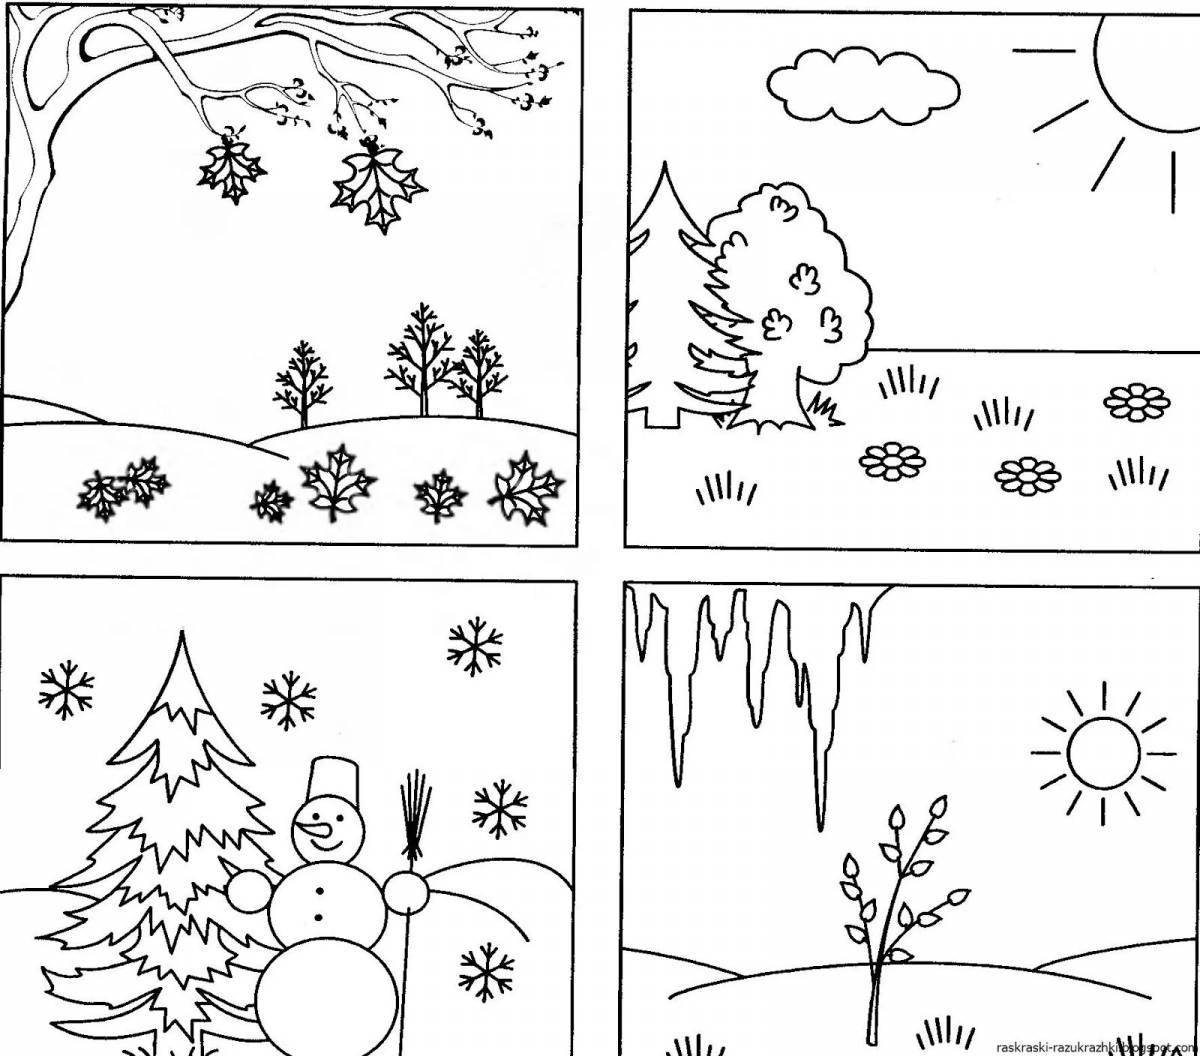 Charming coloring book for 3-4 year olds seasons